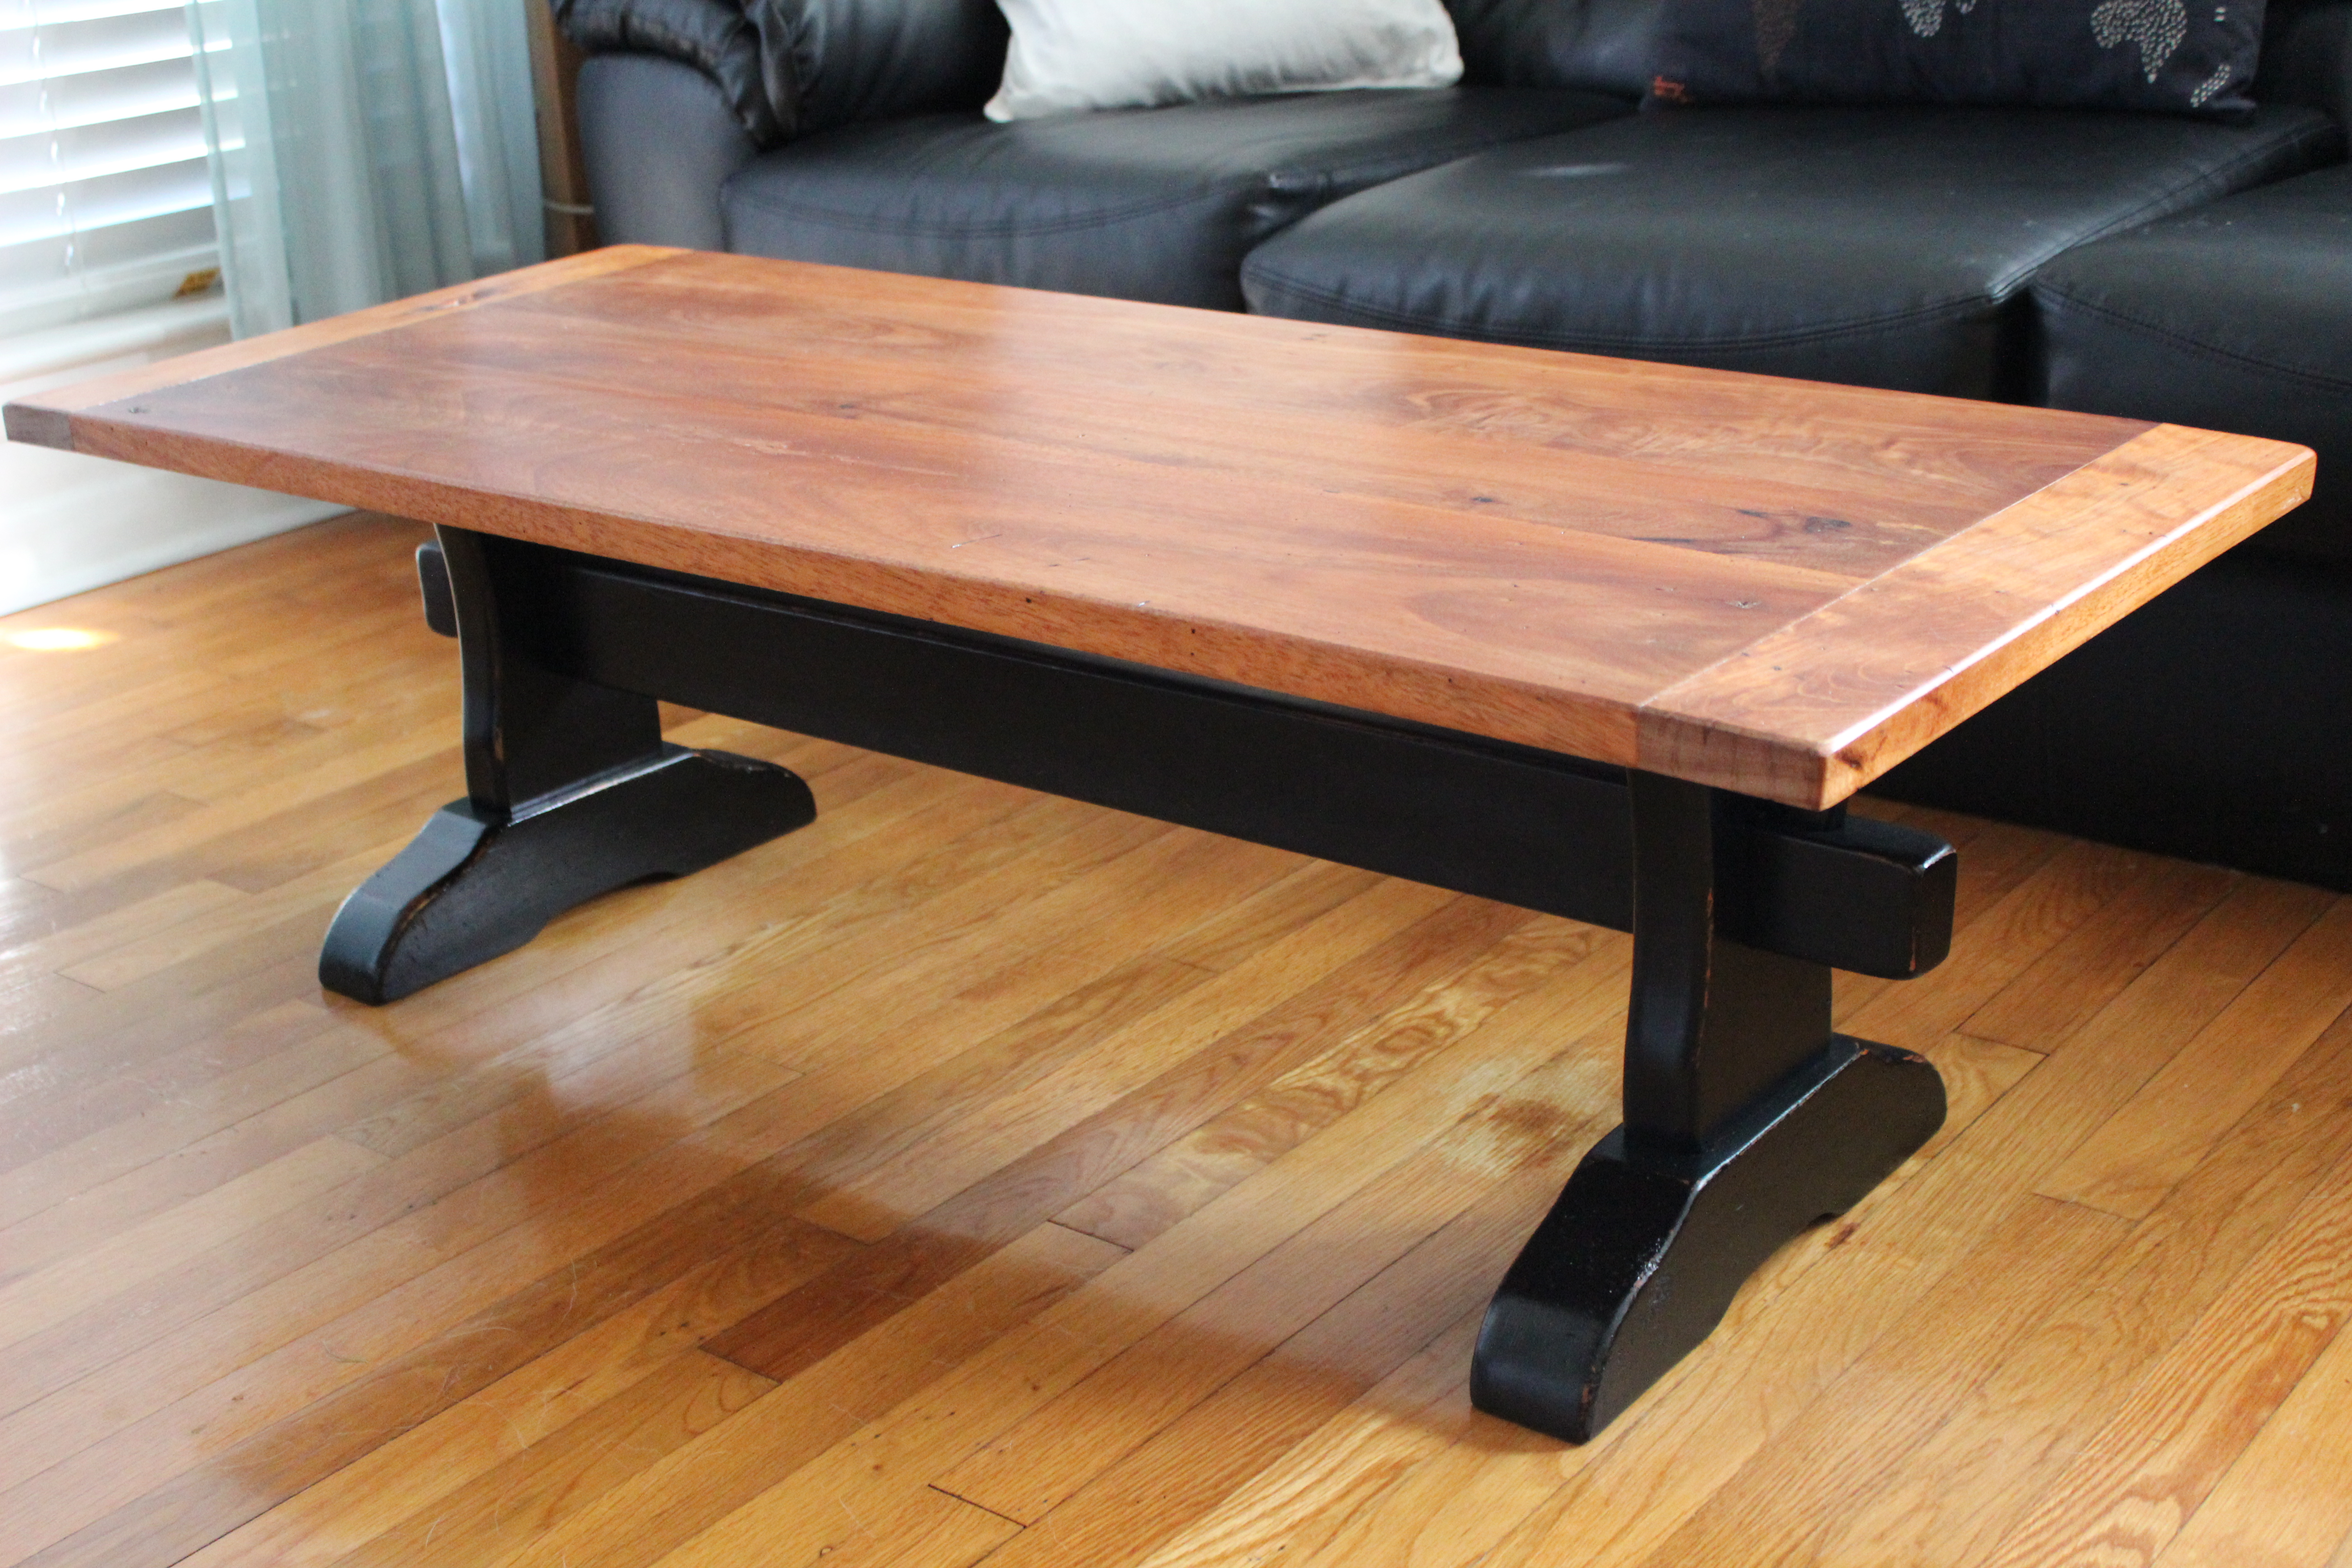 Ana White | Trestle Table with Mahogany Top - DIY Projects